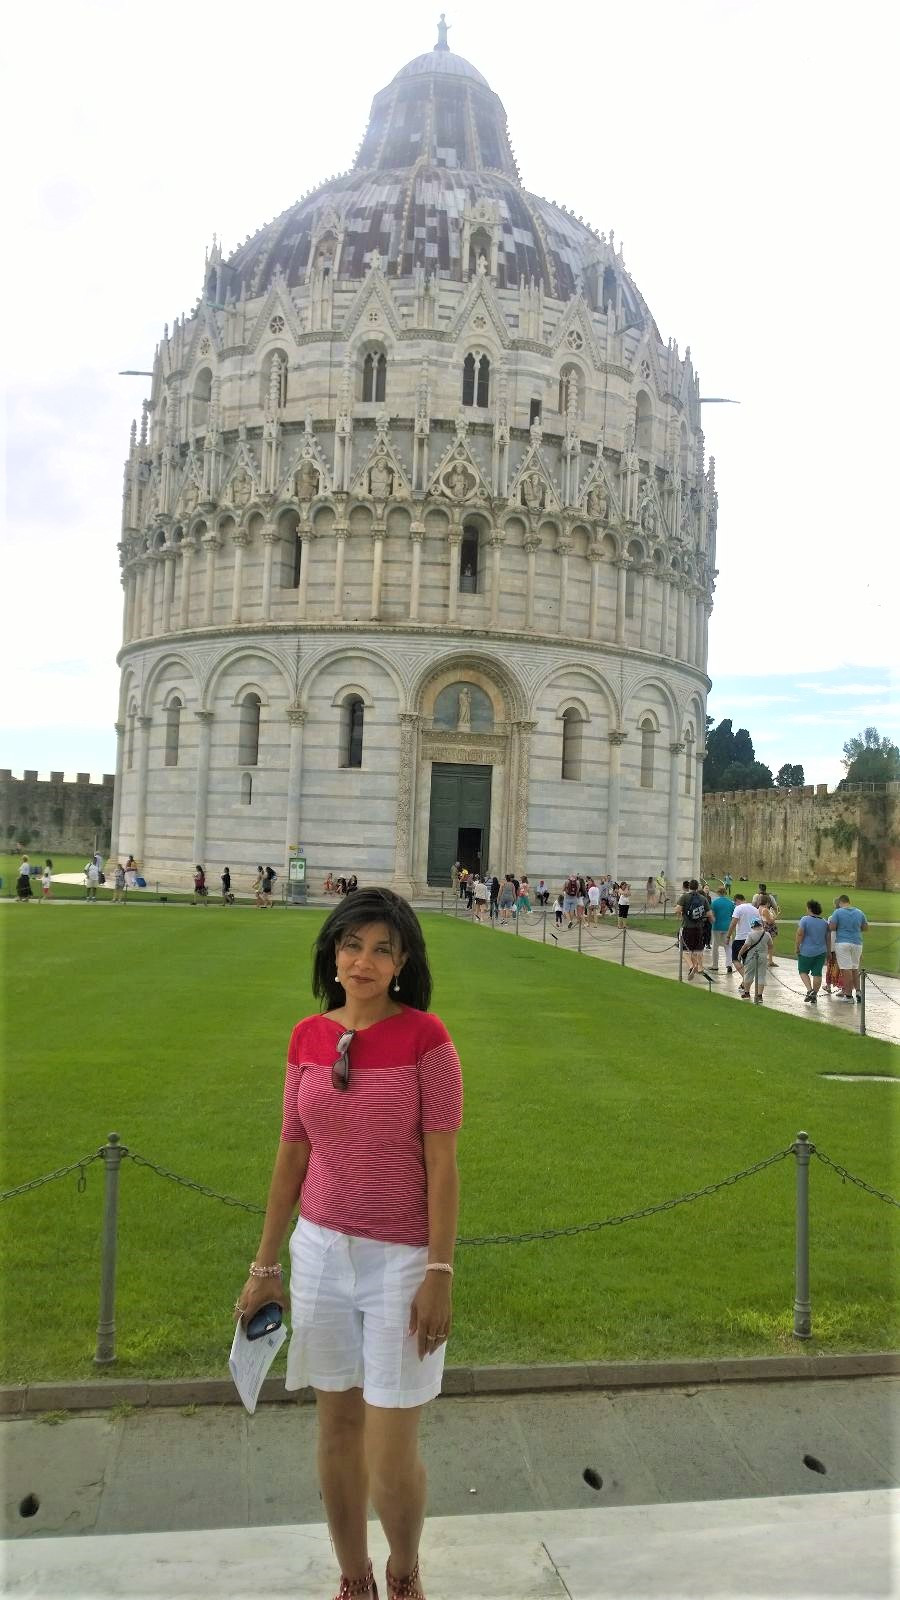 Pisa Baptistery located in the Field of Miracles, Pisa